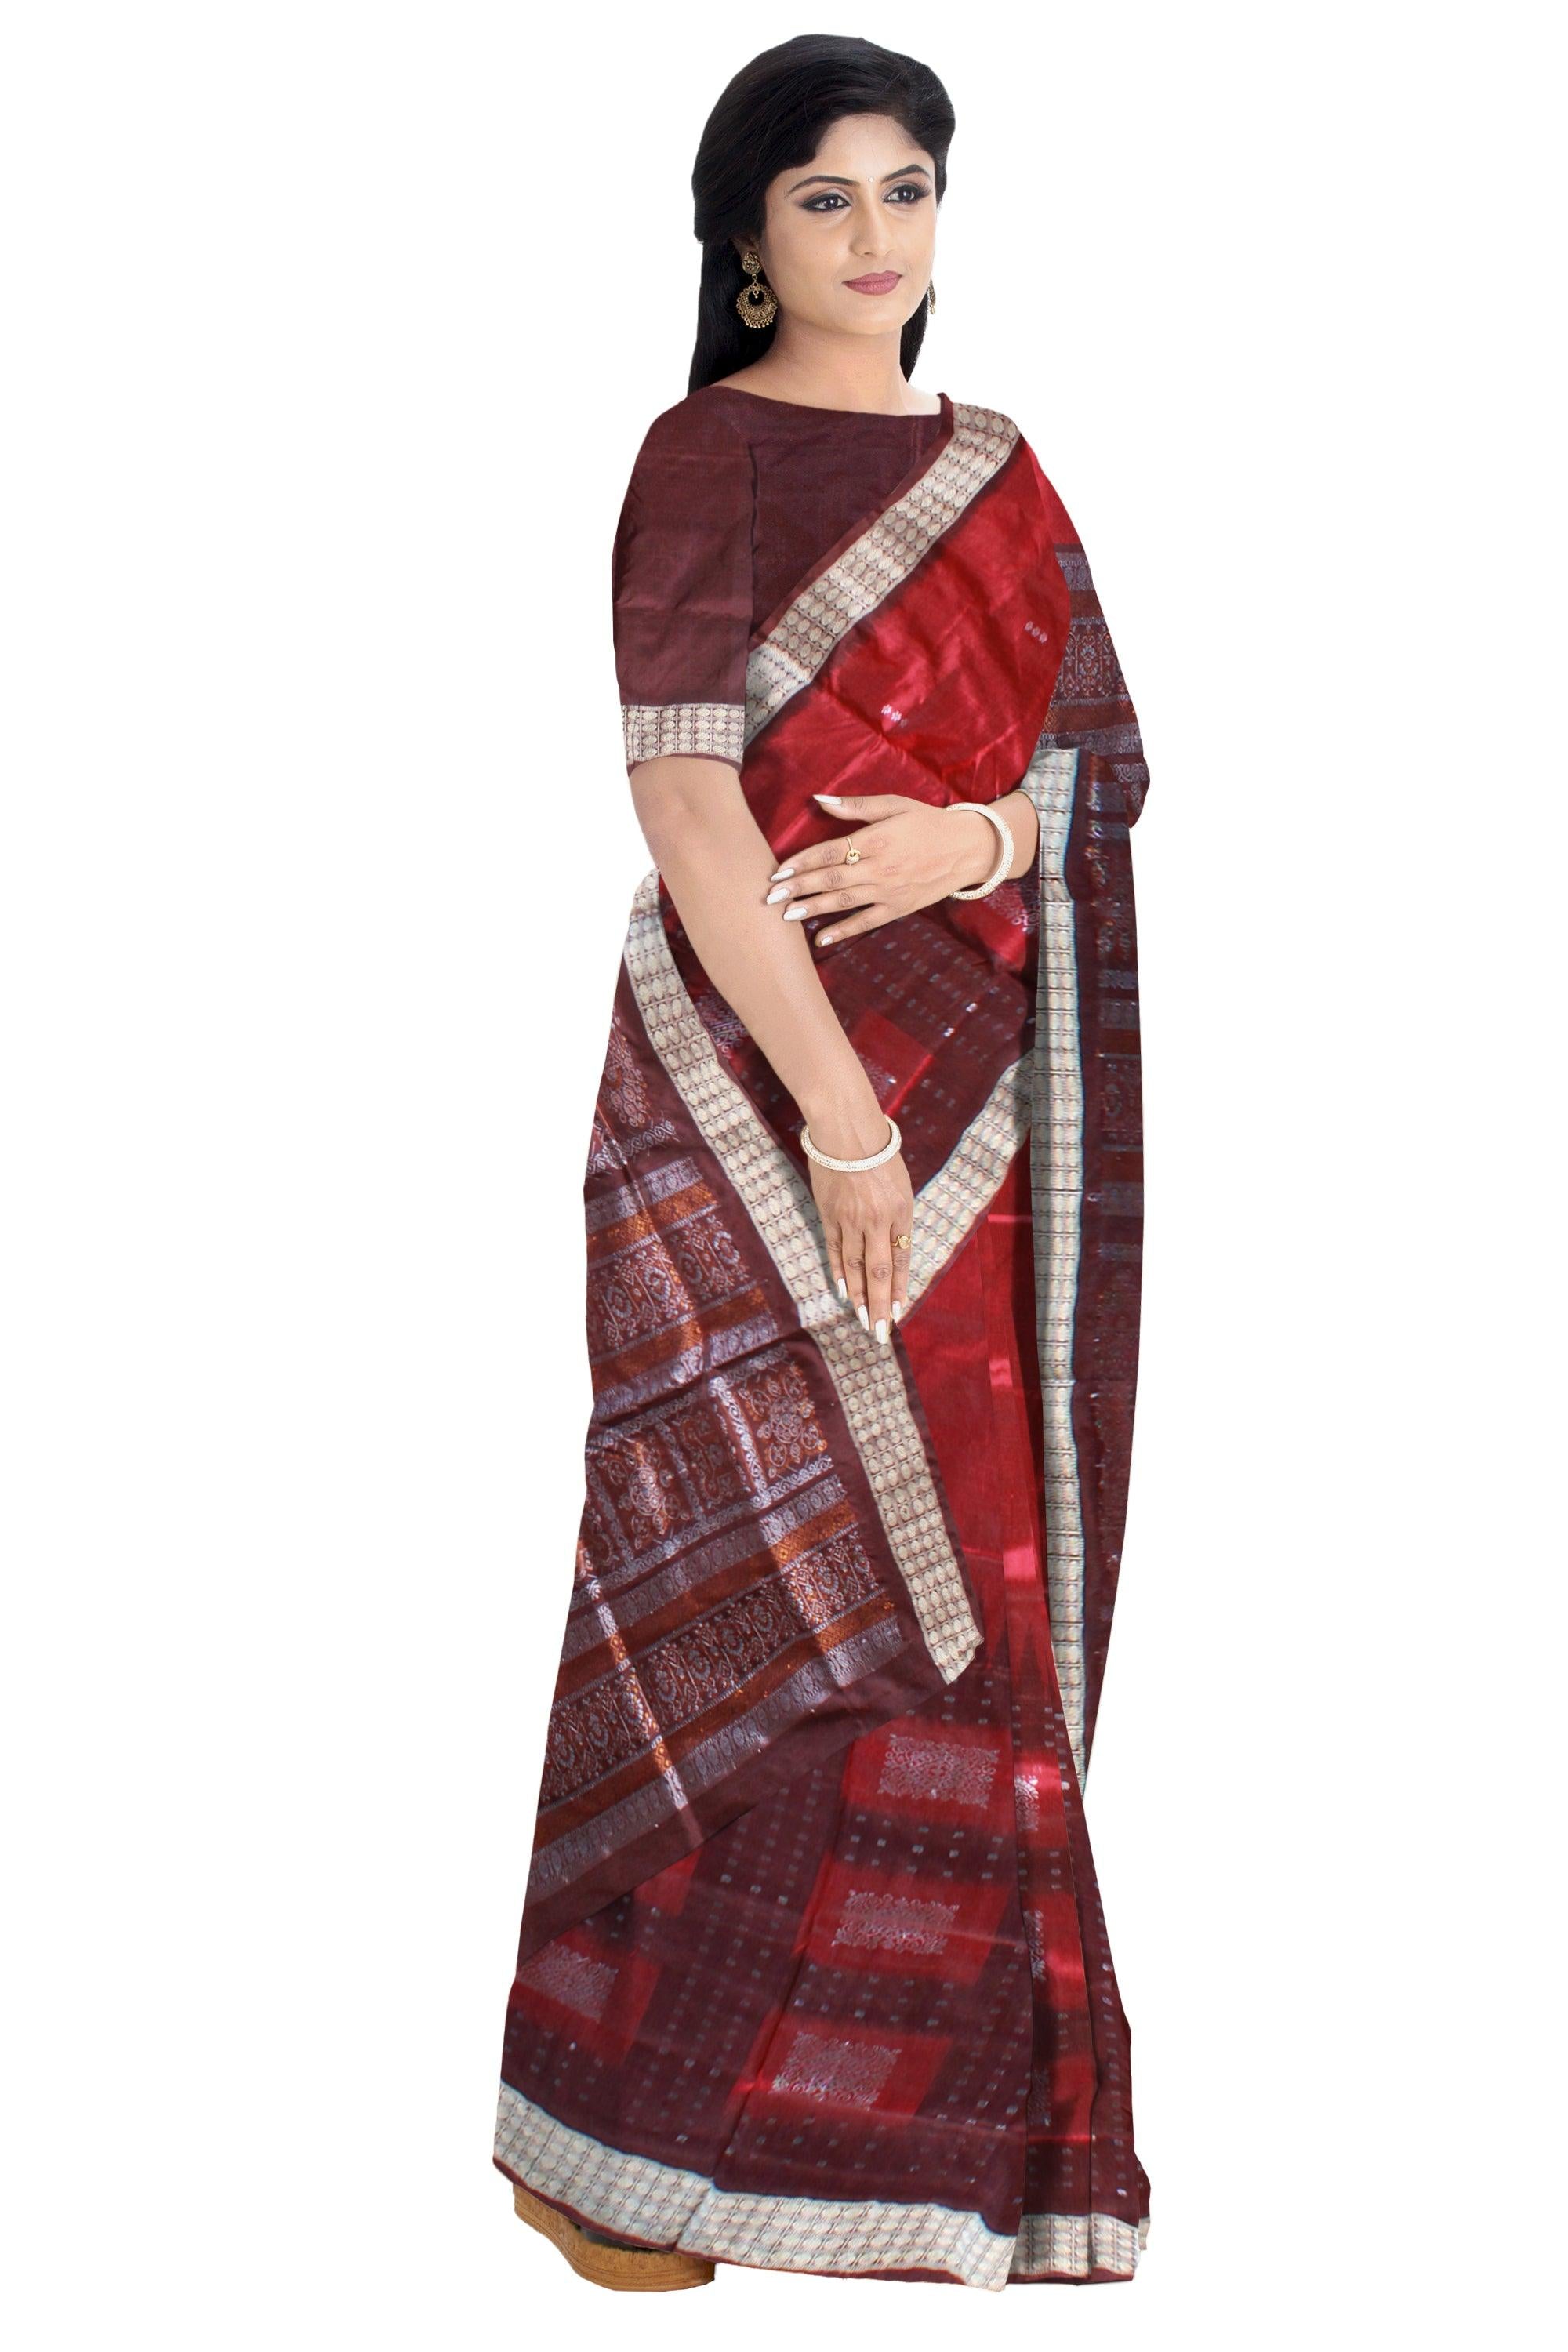 NEW ARRIVAL SABITRI SPECIAL MAROON AND COFFEE COLOR PATA SAREE ,  MATCHING BLOUSE PIECE. - Koshali Arts & Crafts Enterprise